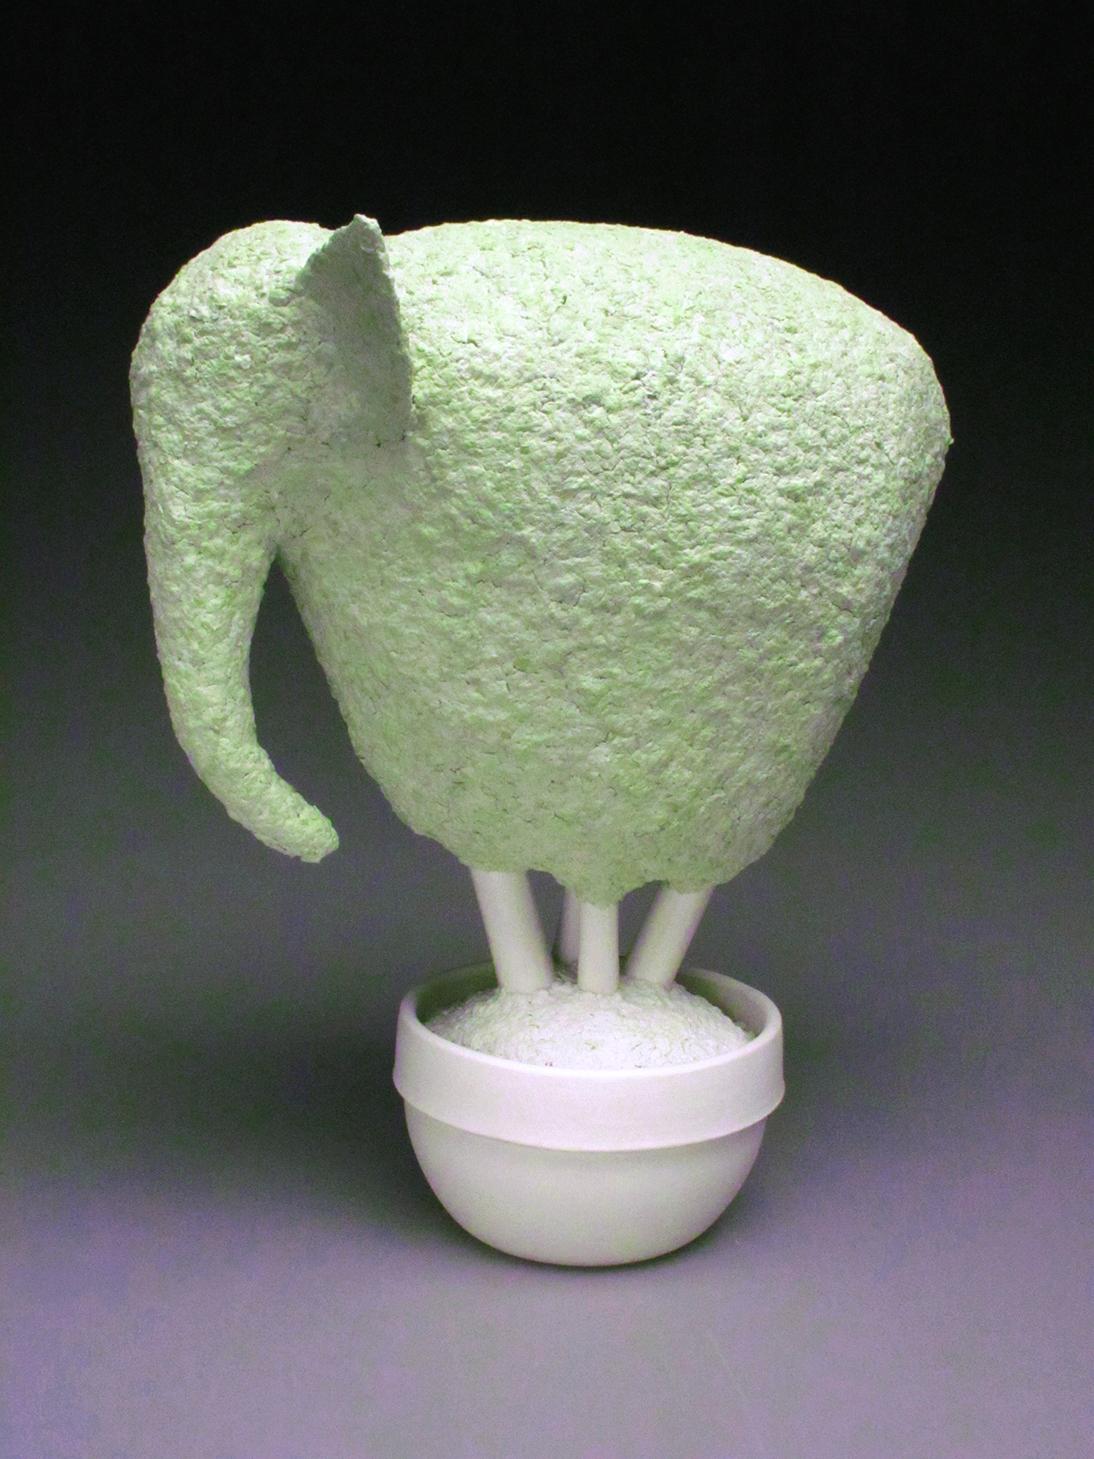 This beautiful soft green paper mache and porcelain elephant topiary sculpture was created by New York artist, Bethany Krull.  The pot portion of the sculpture is wheel thrown in multiple parts while the Elephant Topiary has an interior wire